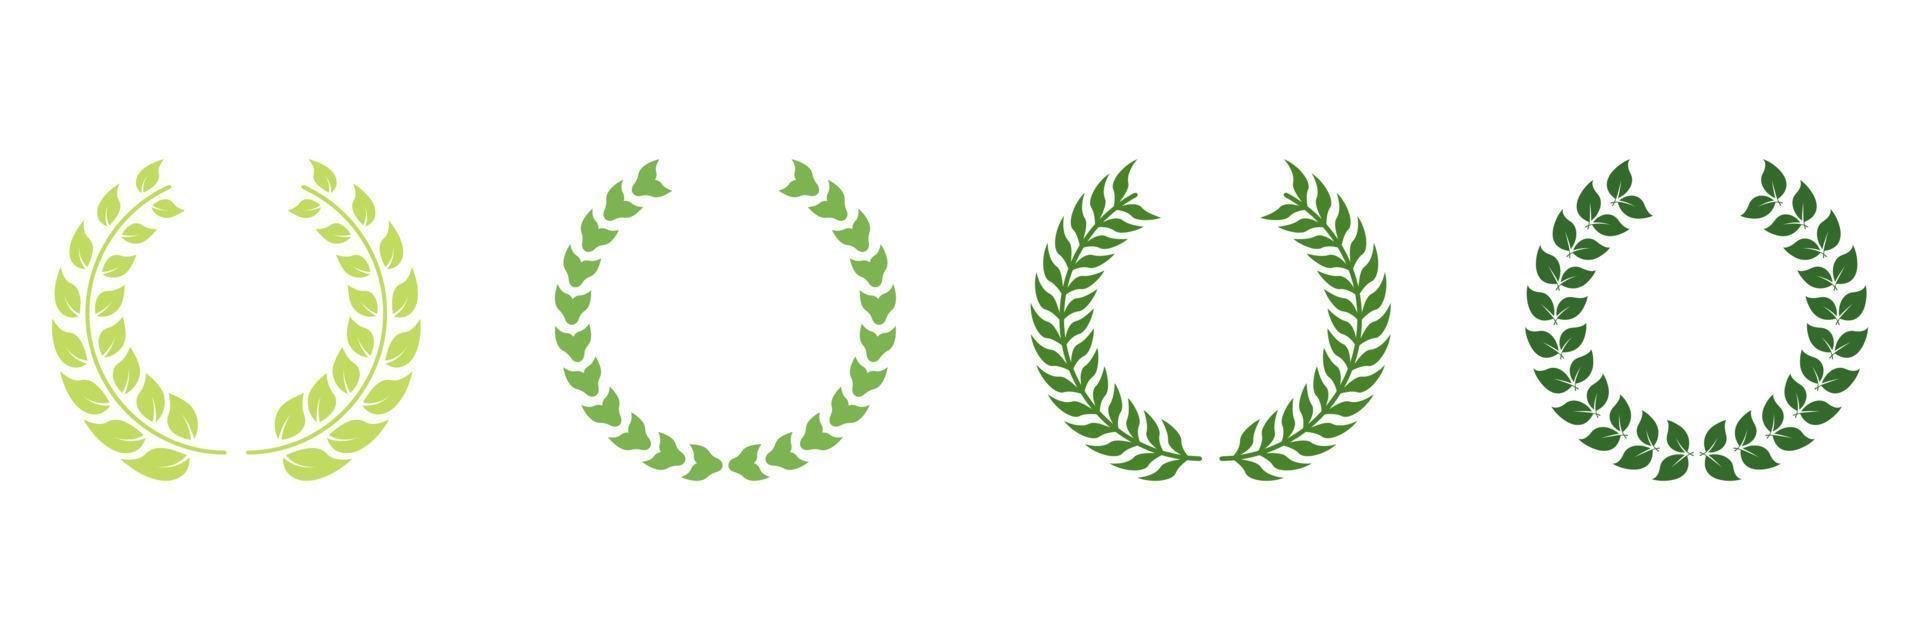 Wreath Laurel, Olive Leaves Trophy. Laurel Wreath Award Green Silhouette Icon. Circle Branch with Leaf Victory Emblem for Winner Pictogram. Vintage Champion Prize Symbol. Isolated Vector Illustration.